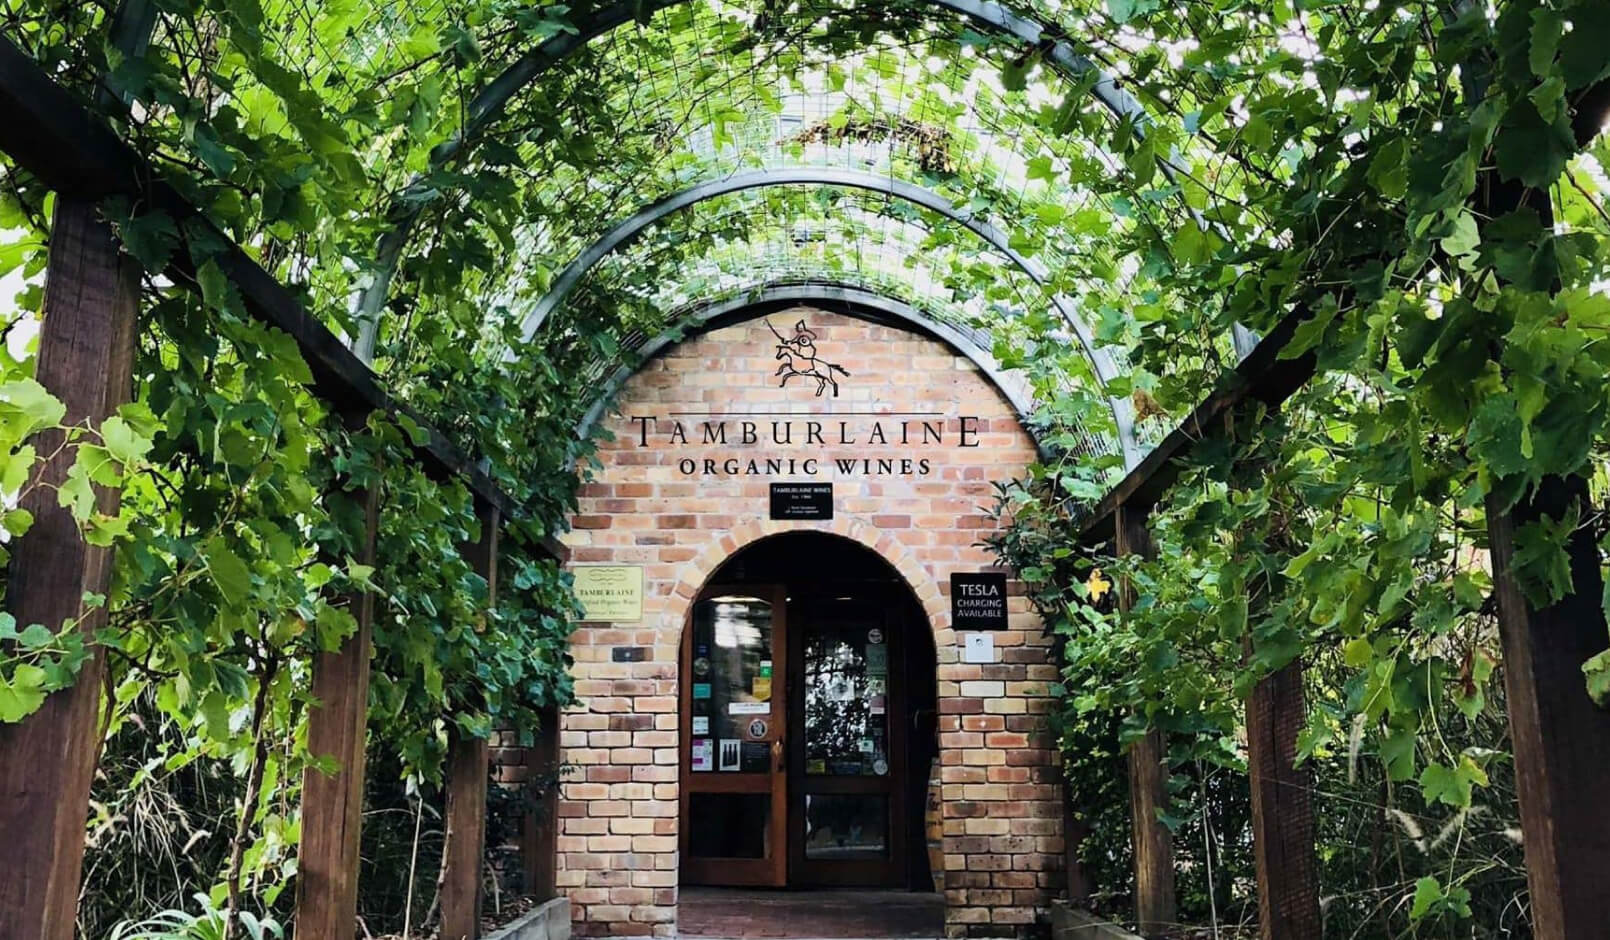 Tamburlaine Organic Wines entrance with greenery and rounded doors